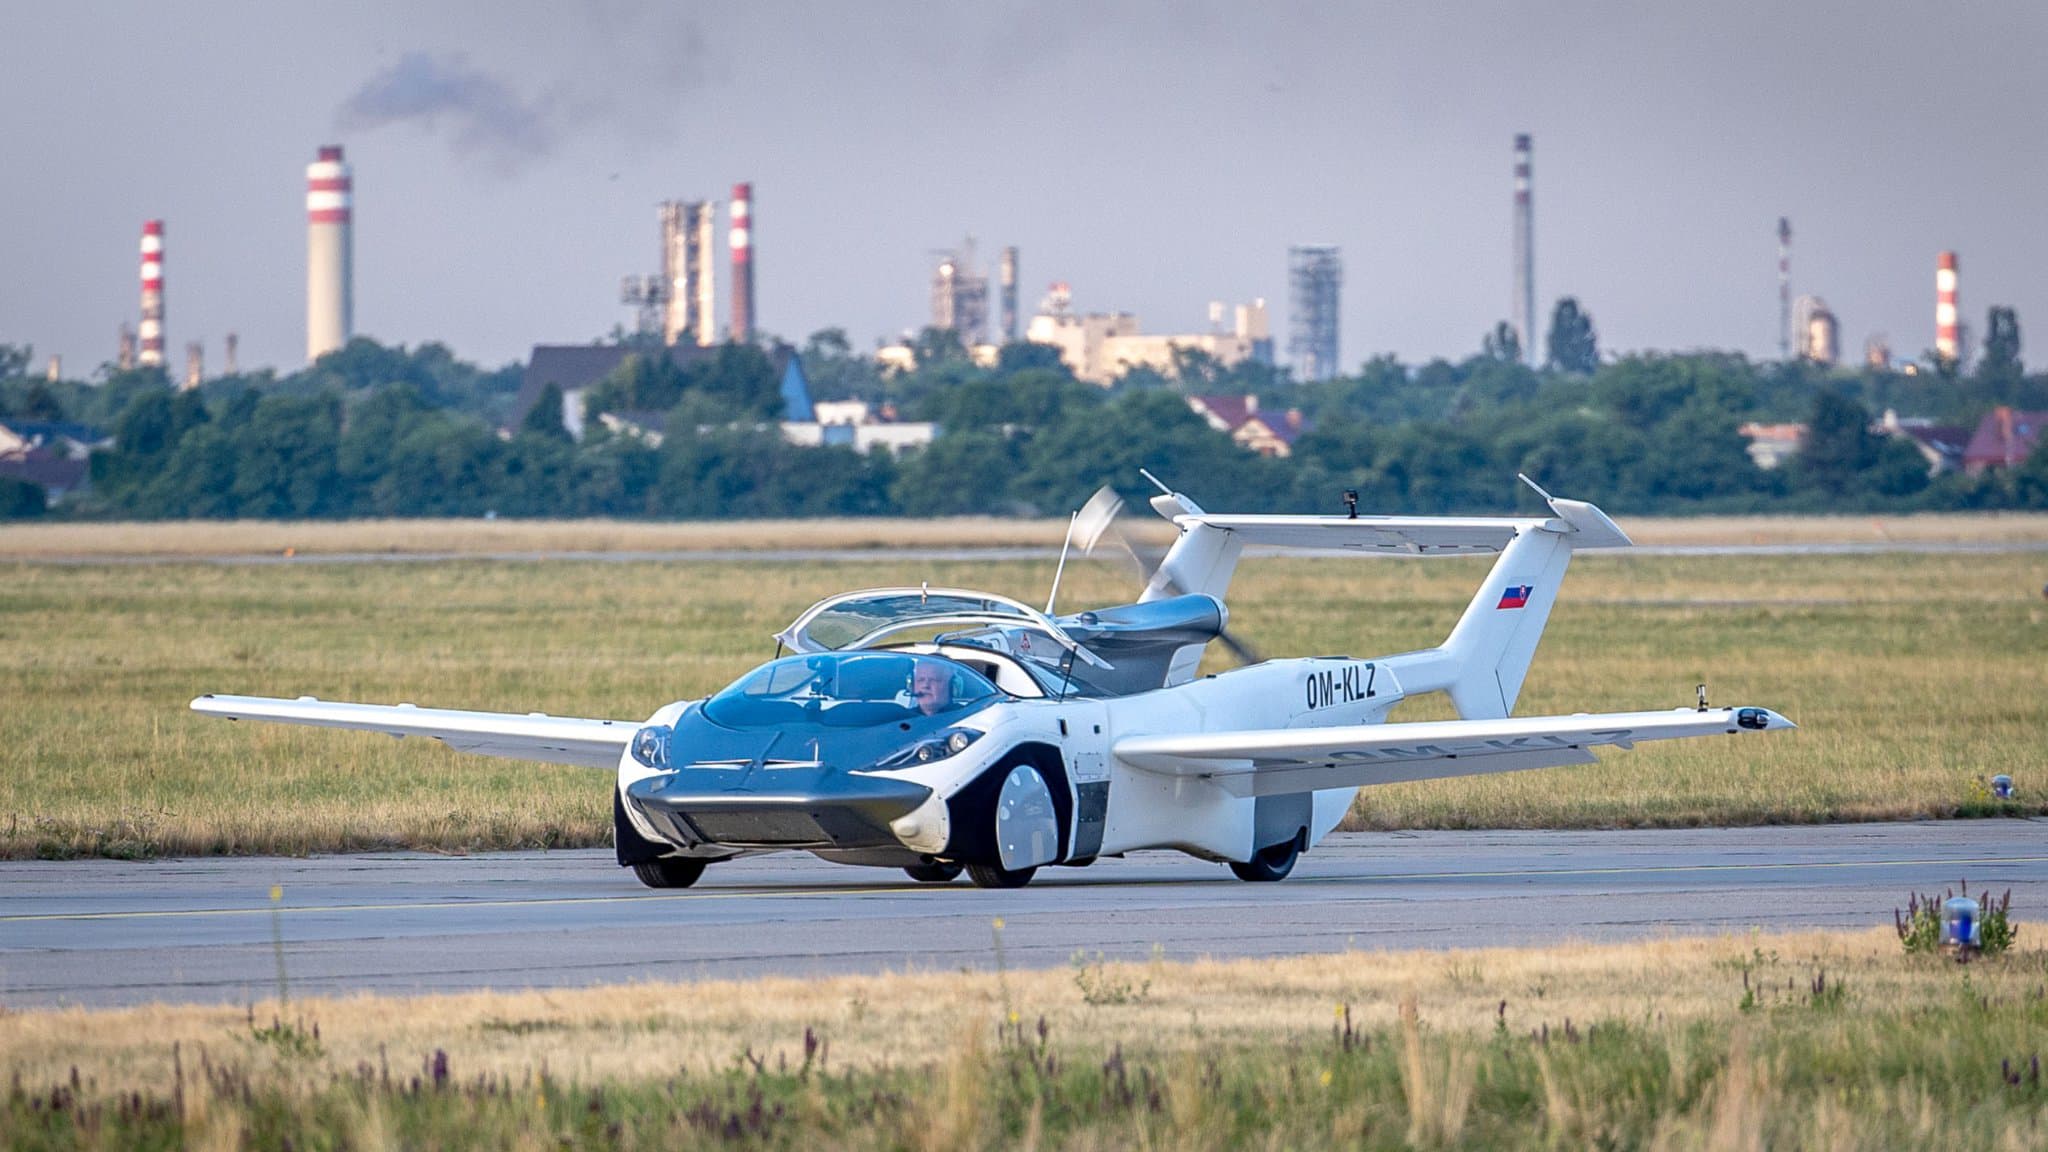 A Slovak startup turns science fiction into reality with its flying car سيارته

